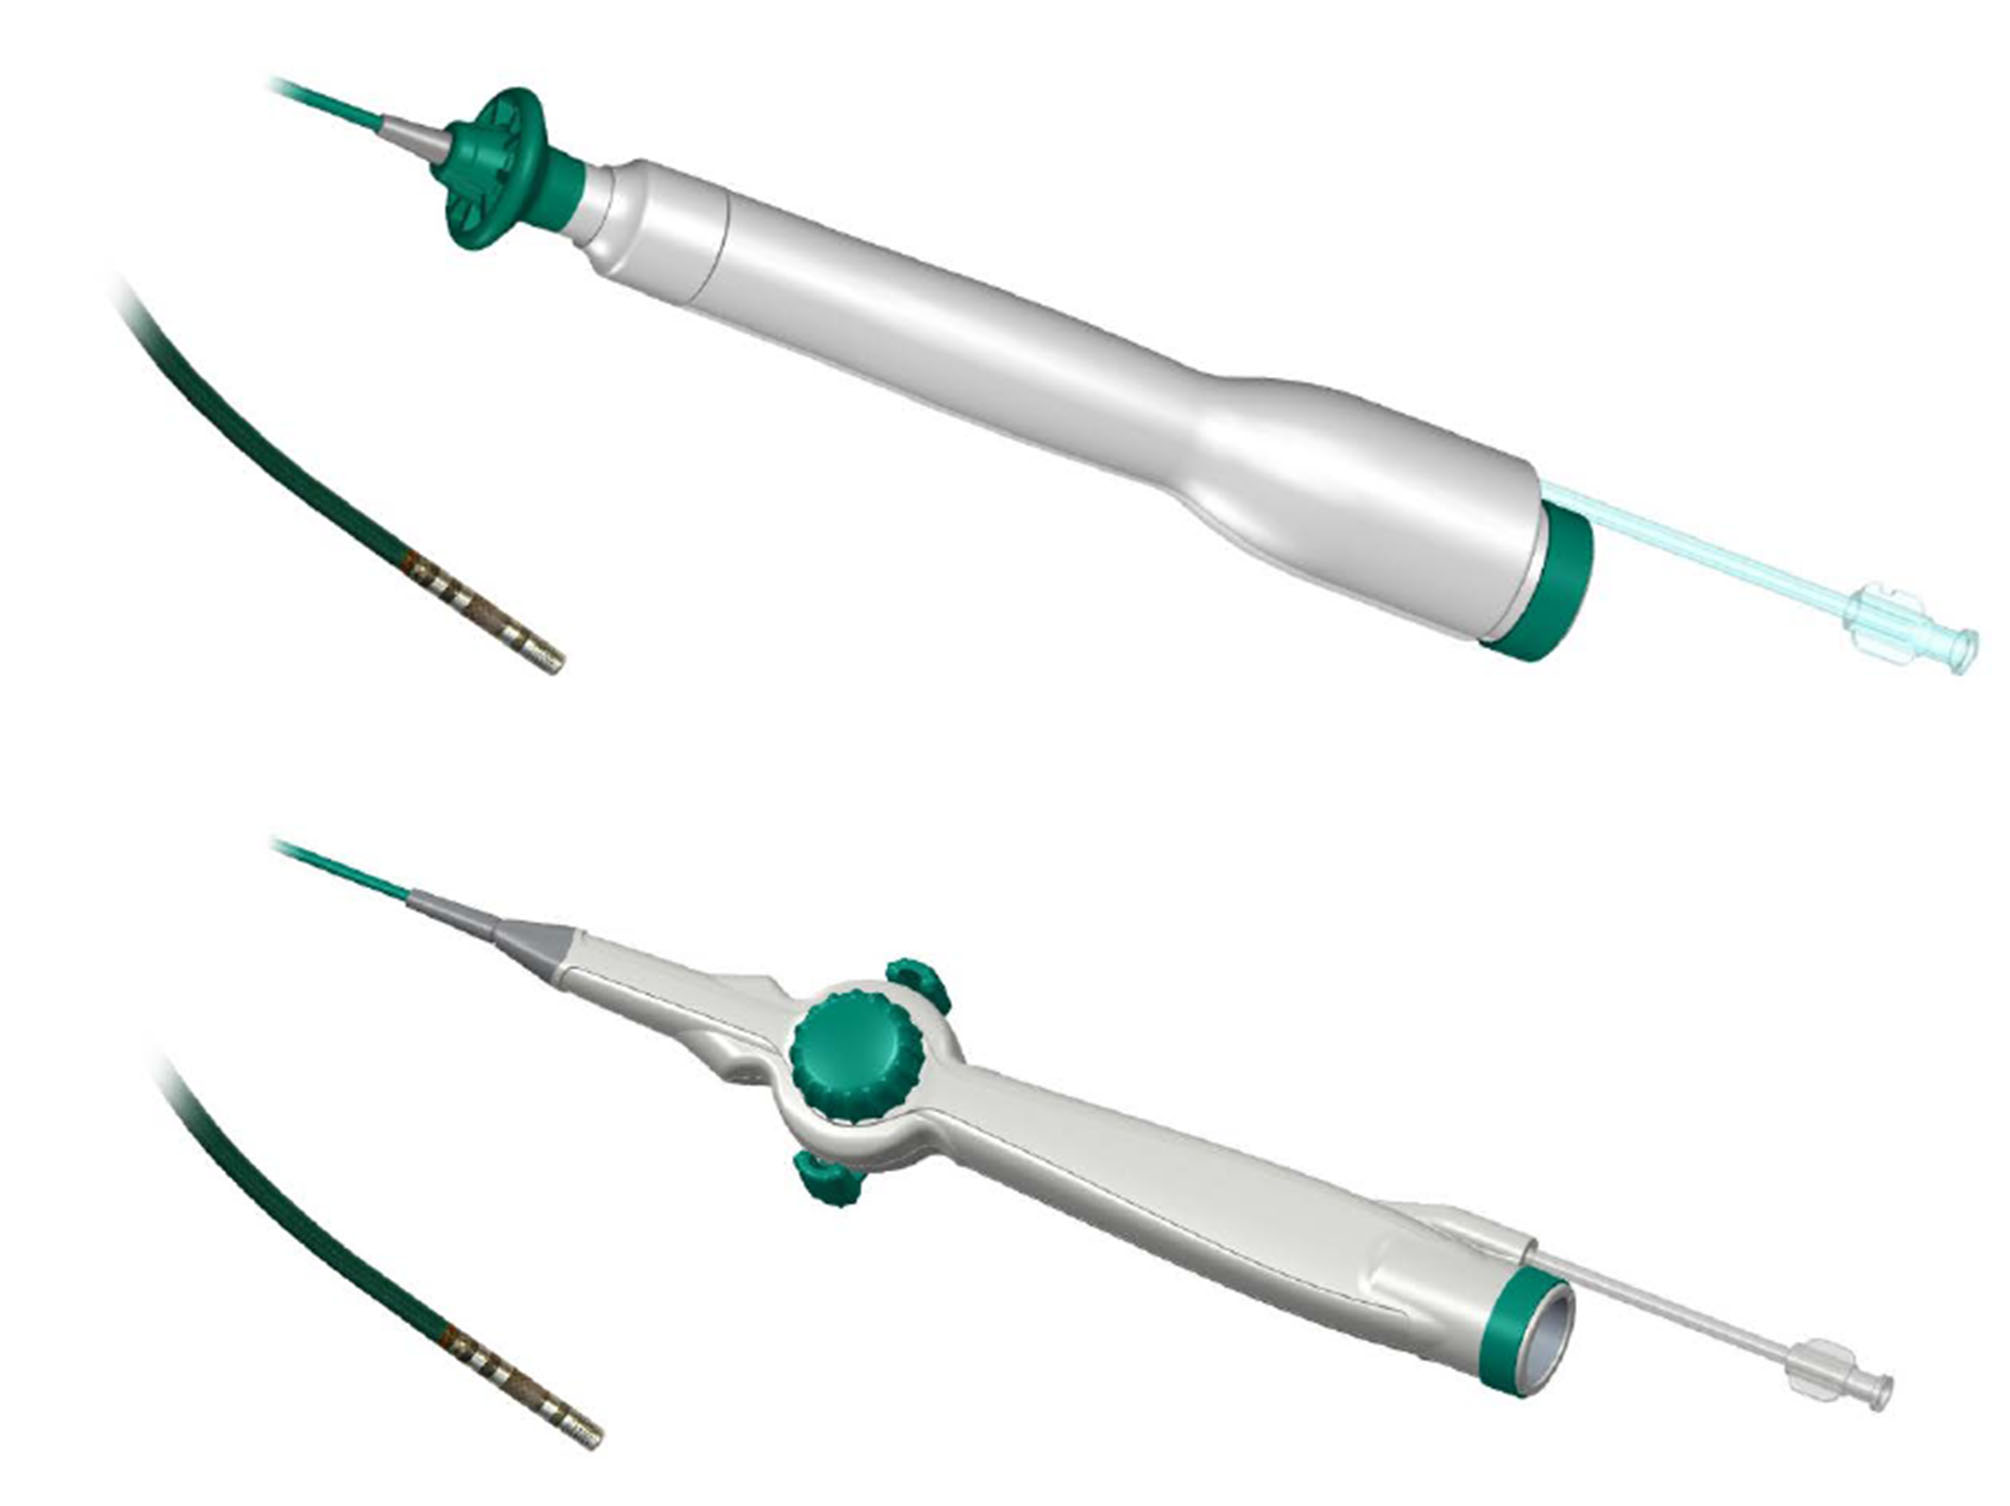 FlexAbility Ablation Catheters pictured include Sensor Enabled Uni-Directional on the top and Sensor Enabled Bi-Directional on the bottom.